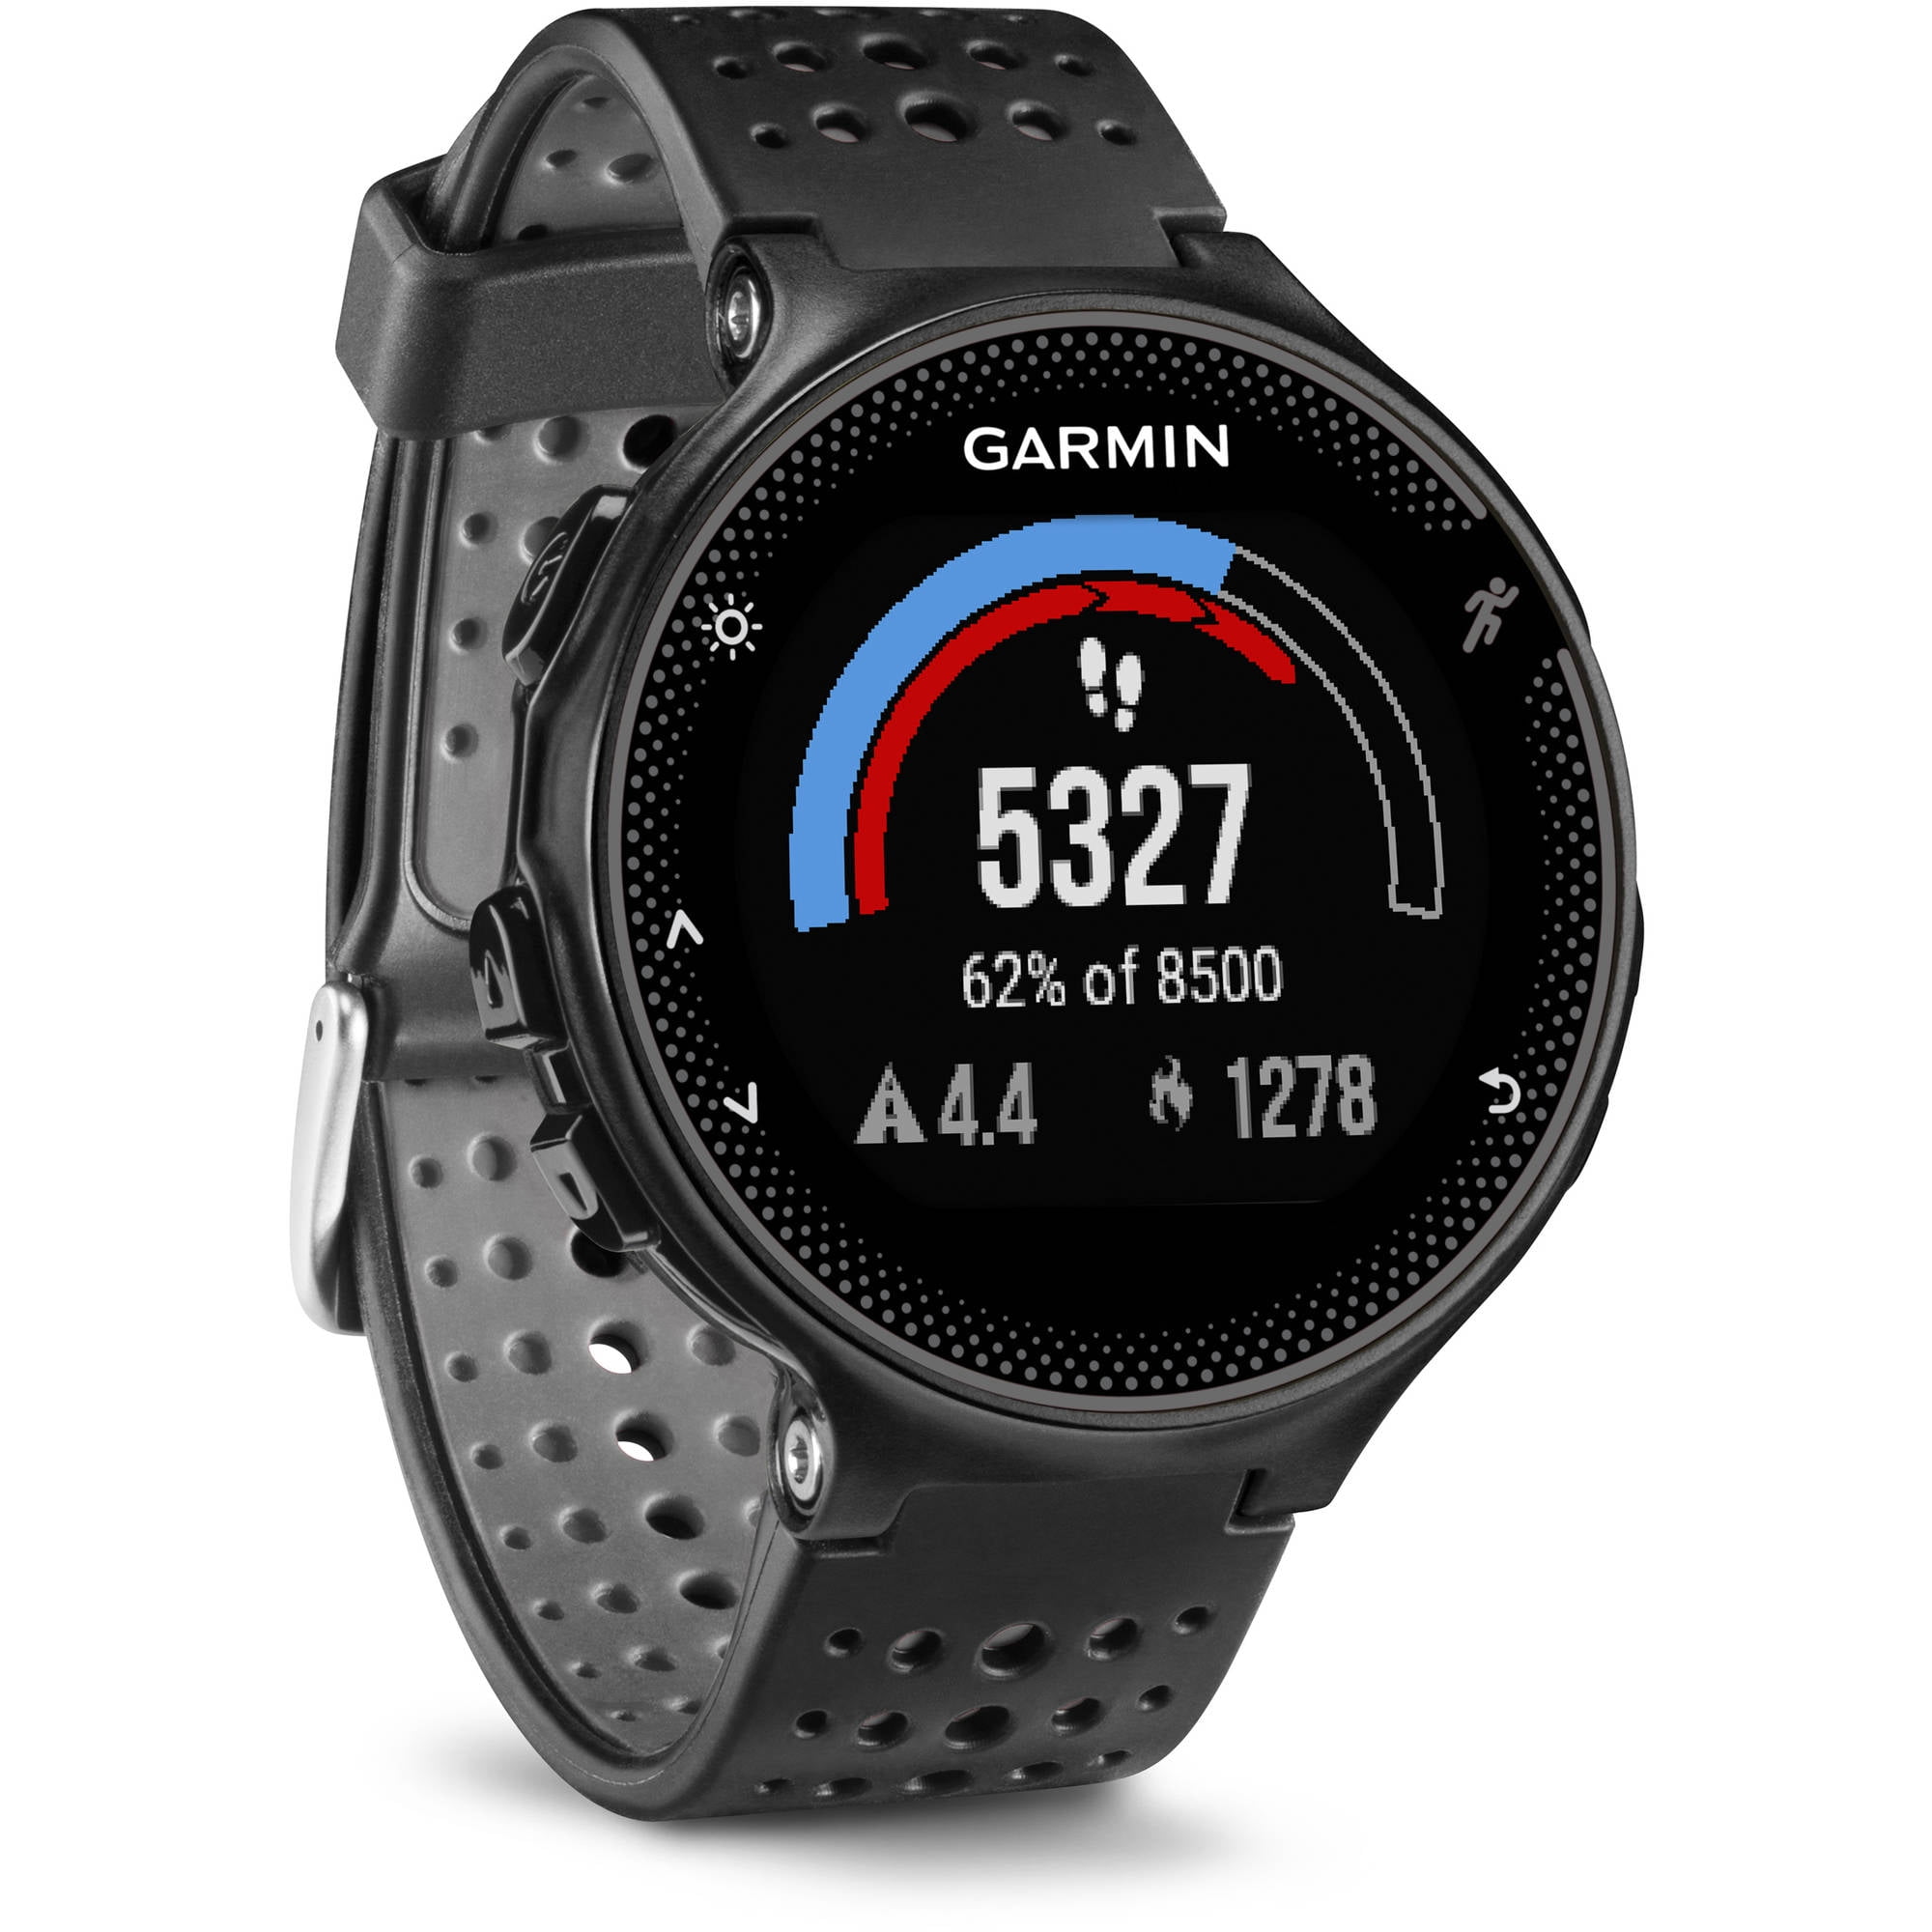 Garmin Forerunner 235 review: The best watch for casual and